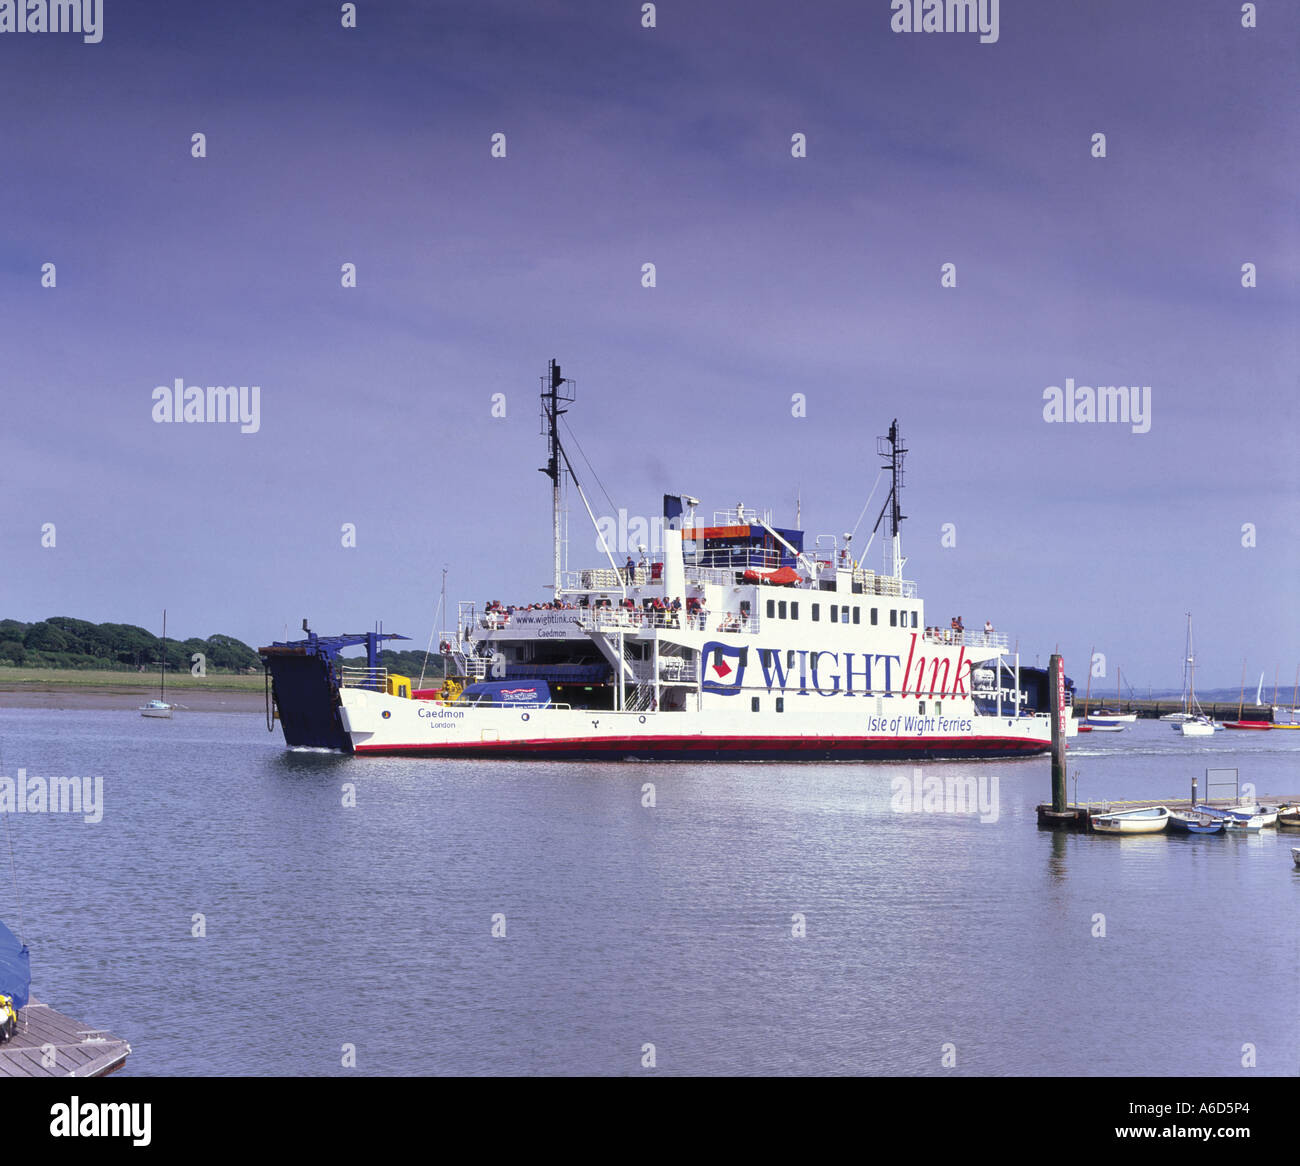 Isle of Wight ferry arriving at Lymington Stock Photo